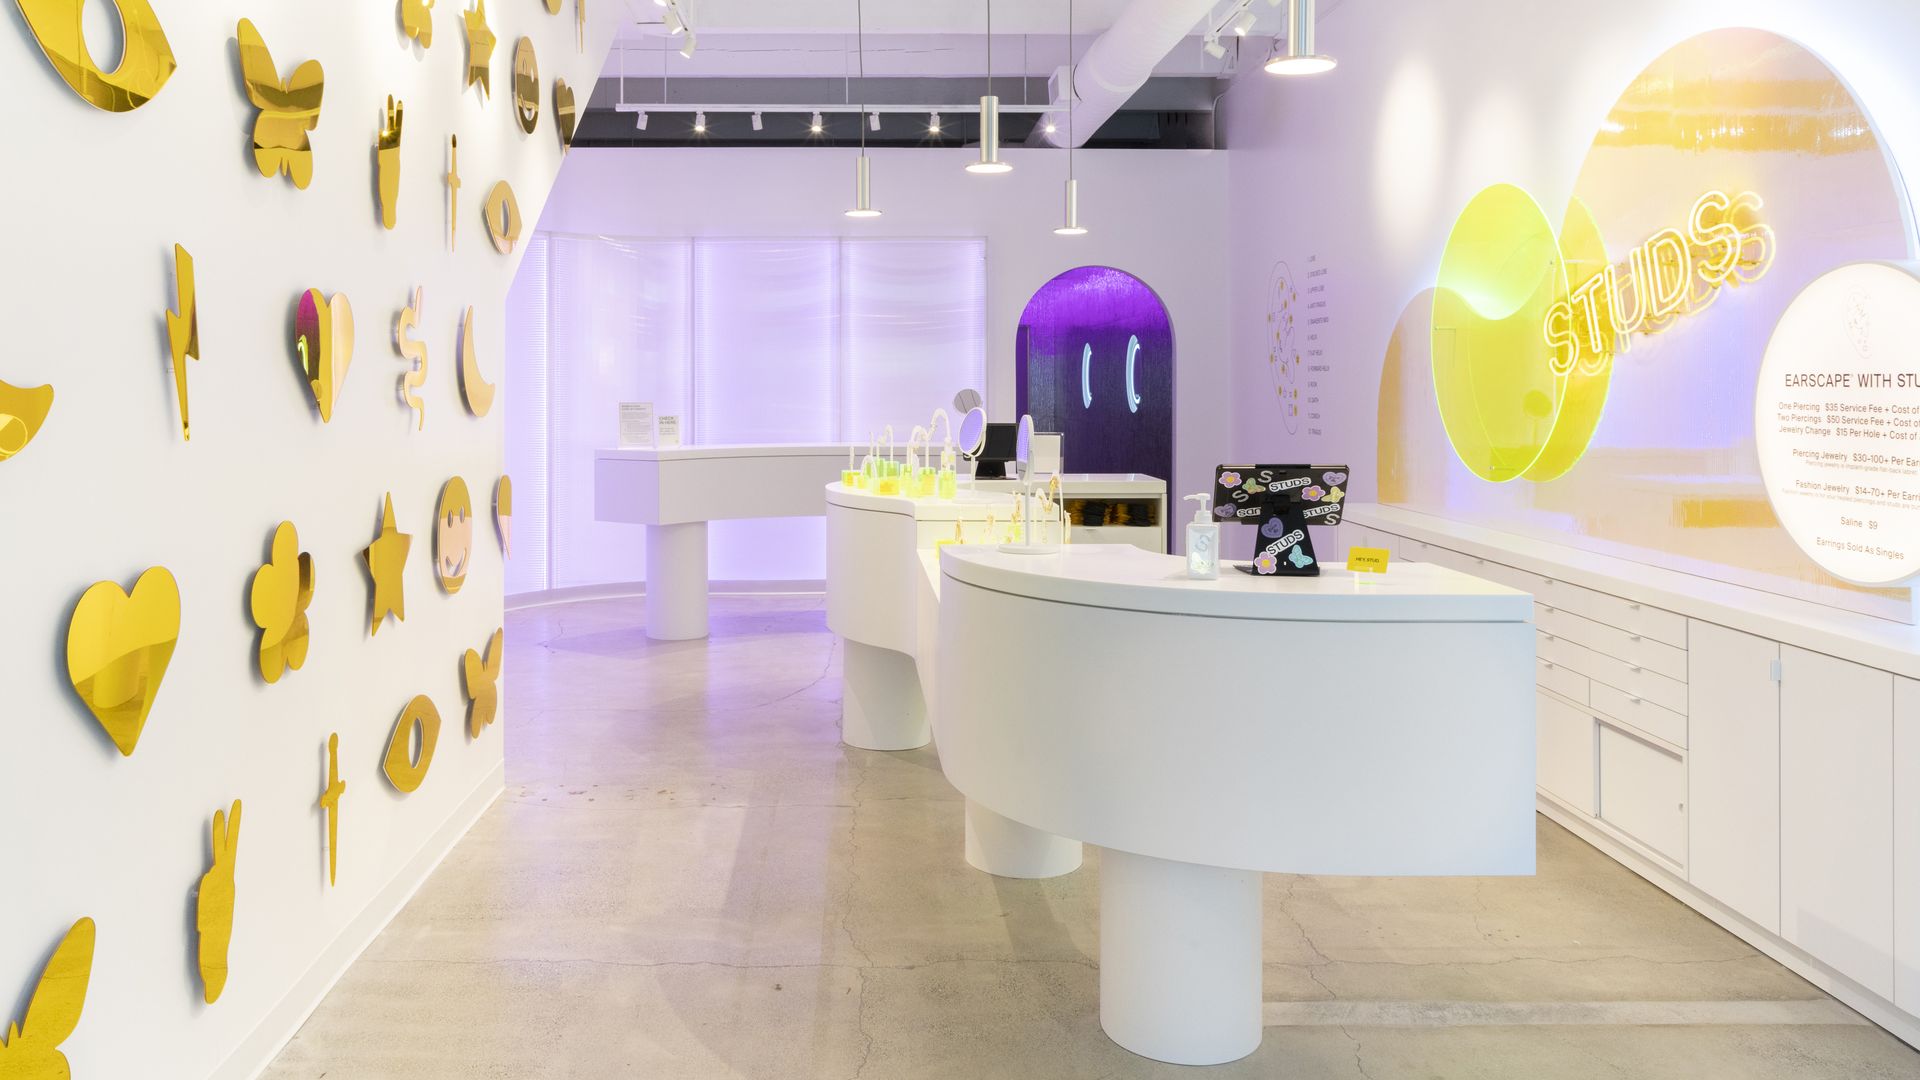 inside the Studs piercing studio with gold emoticons